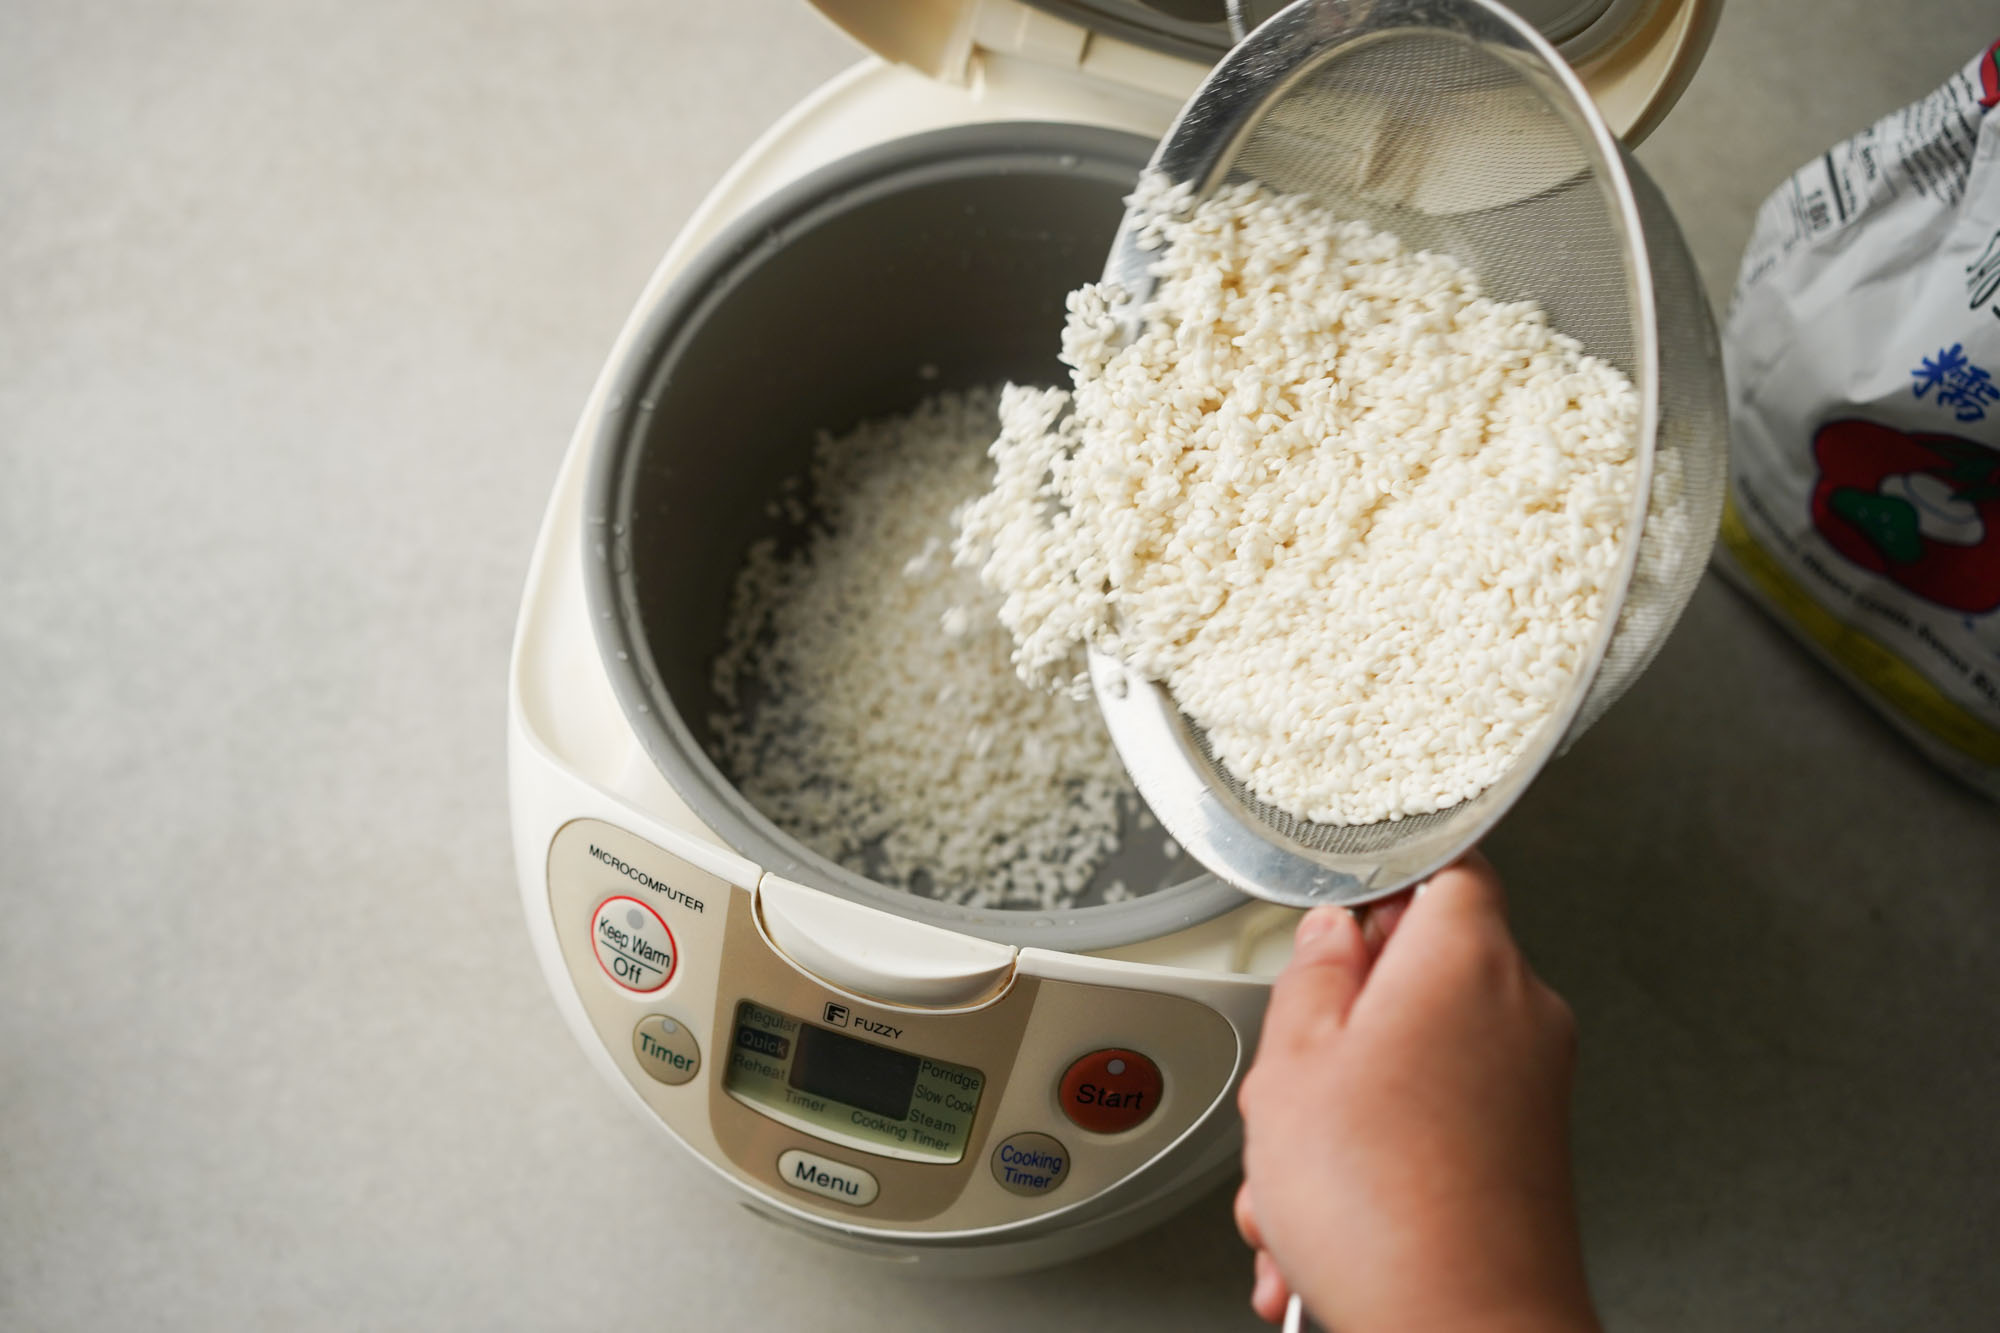 https://www.hungryhuy.com/wp-content/uploads/pouring-into-rice-cooker.jpg